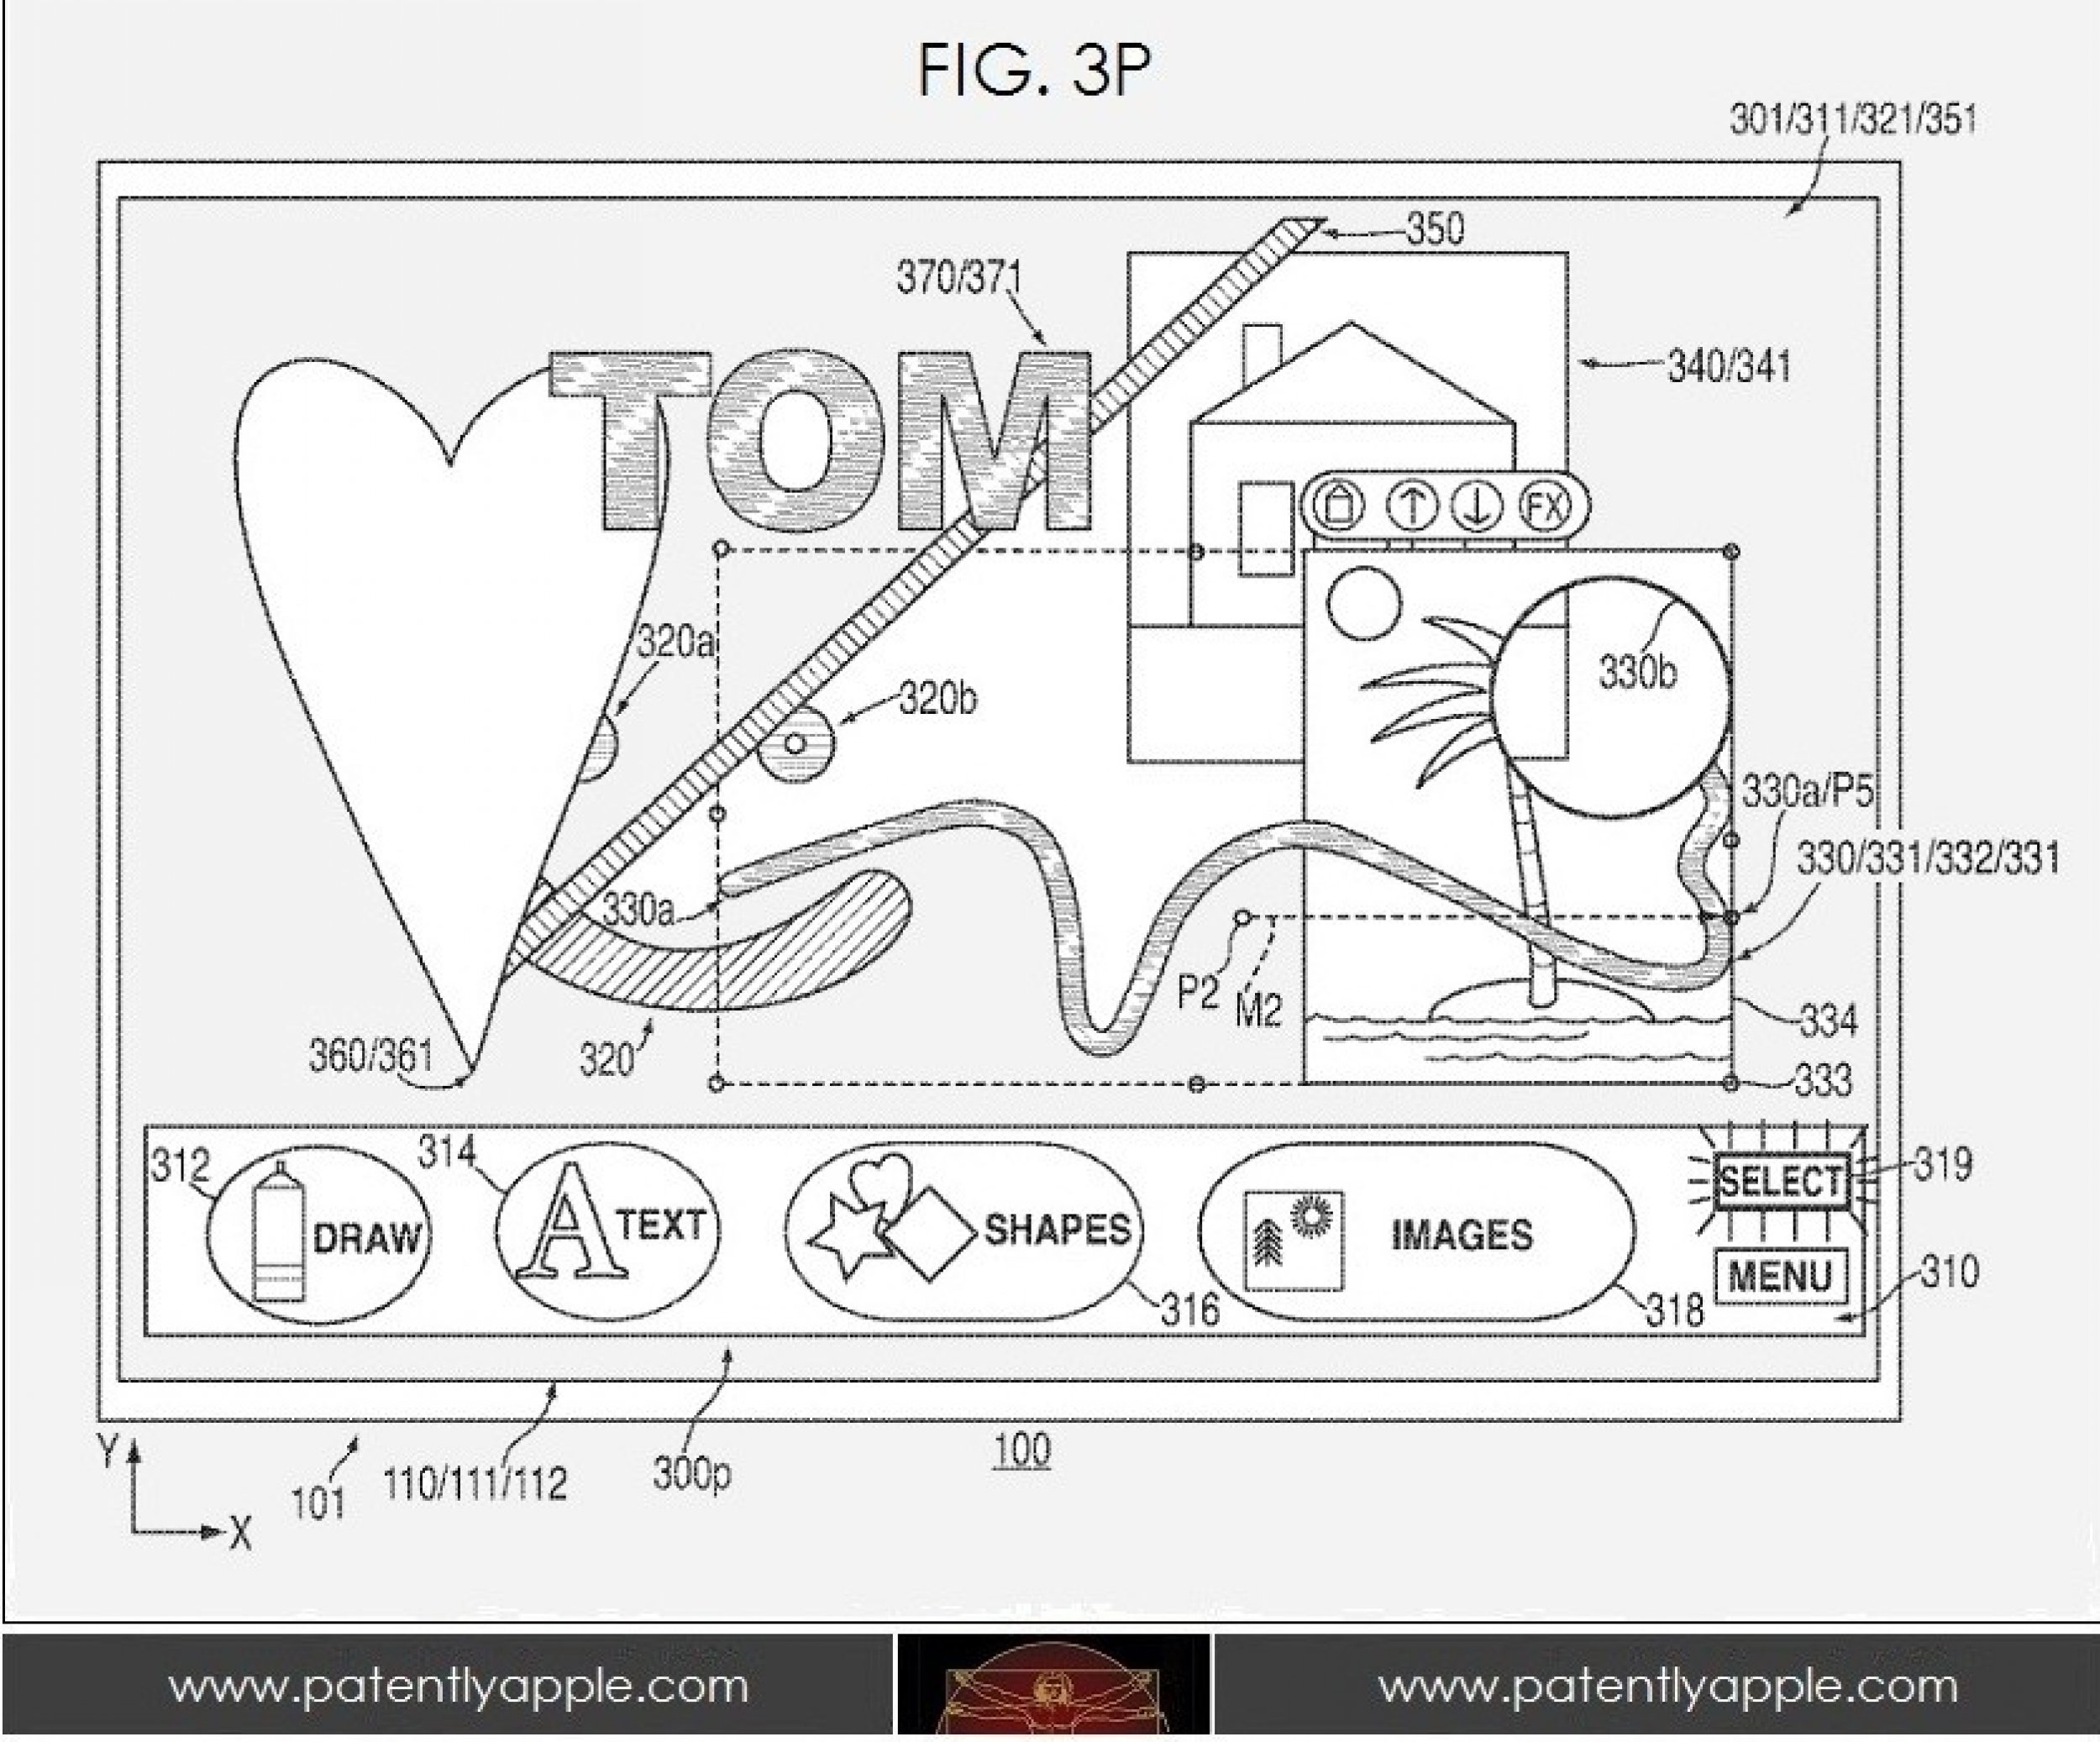 Apple Patent Reveals Plans To Release Adobe Photoshop Rival For Mac, iPad PICTURES